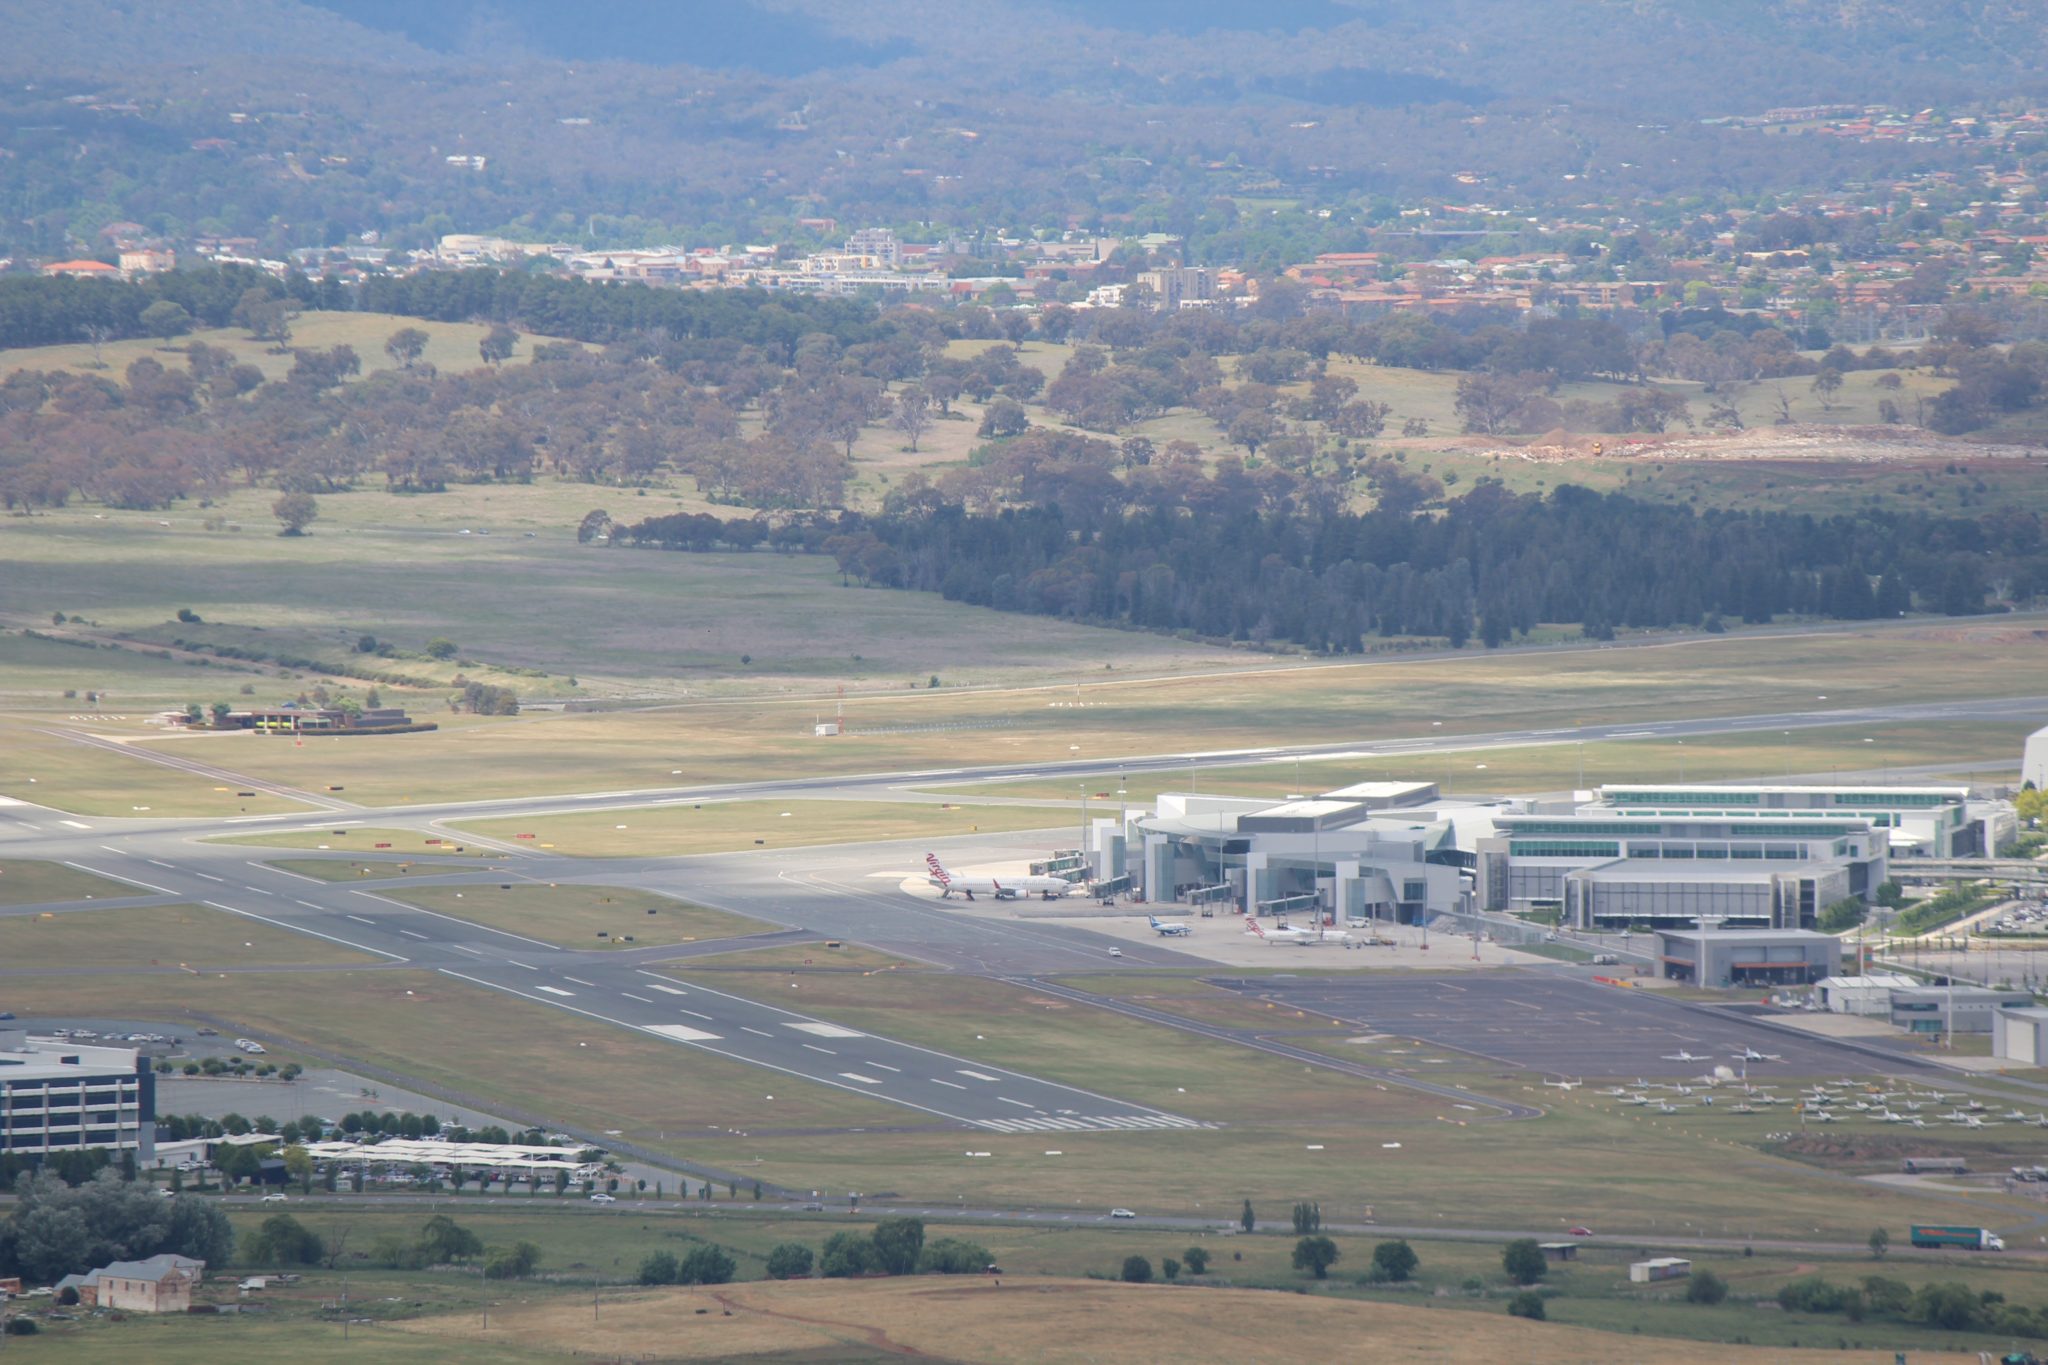 Canberra airport from Mount Ainslie